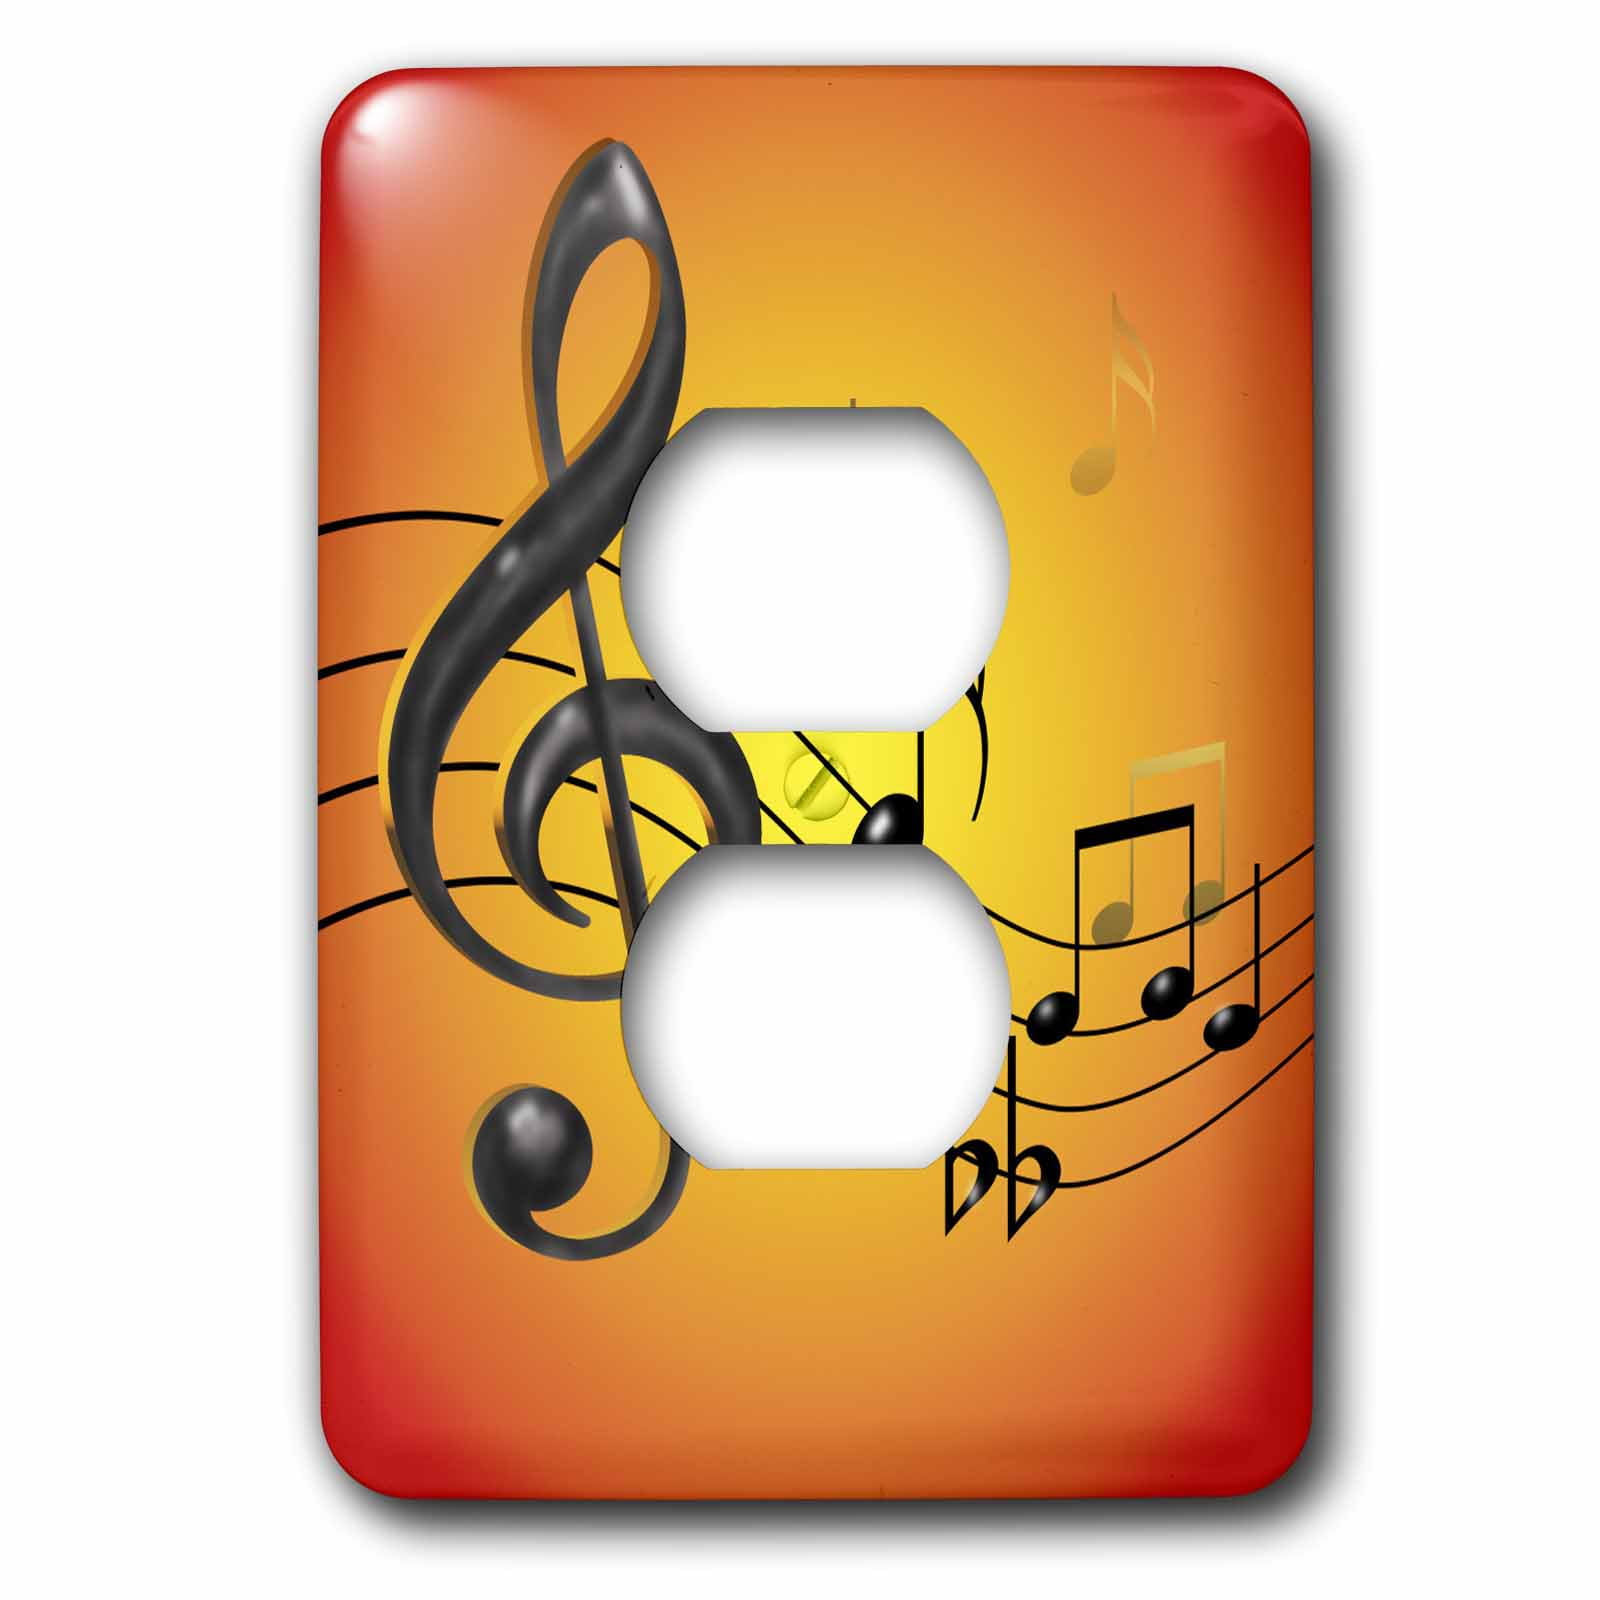 3dRose lsp_46645_1 Colorful Abstract with 3D Musical Notes in Black and Gold On A Bright Yellow Orange Gradient Toggle Switch 